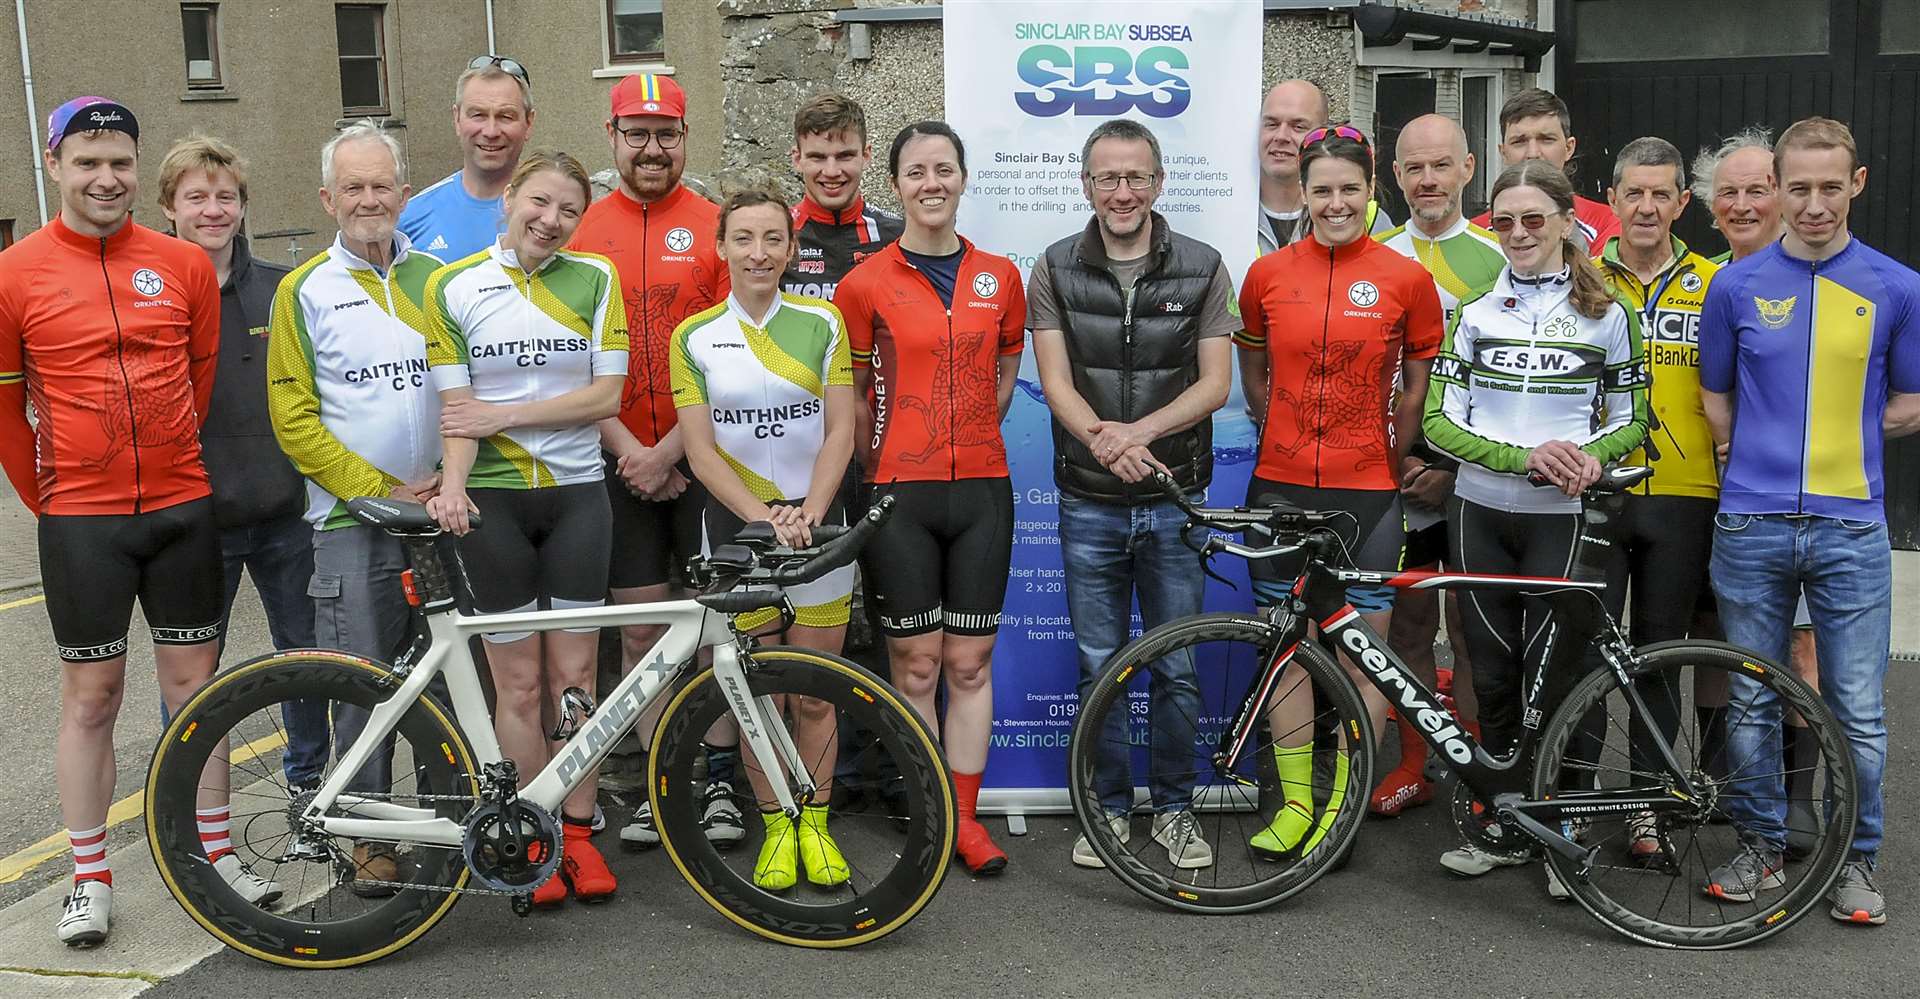 Competitors in the Caithness Festival of Cycling, promoted by Caithness Cycling Club and supported by Sinclair Bay Subsea.